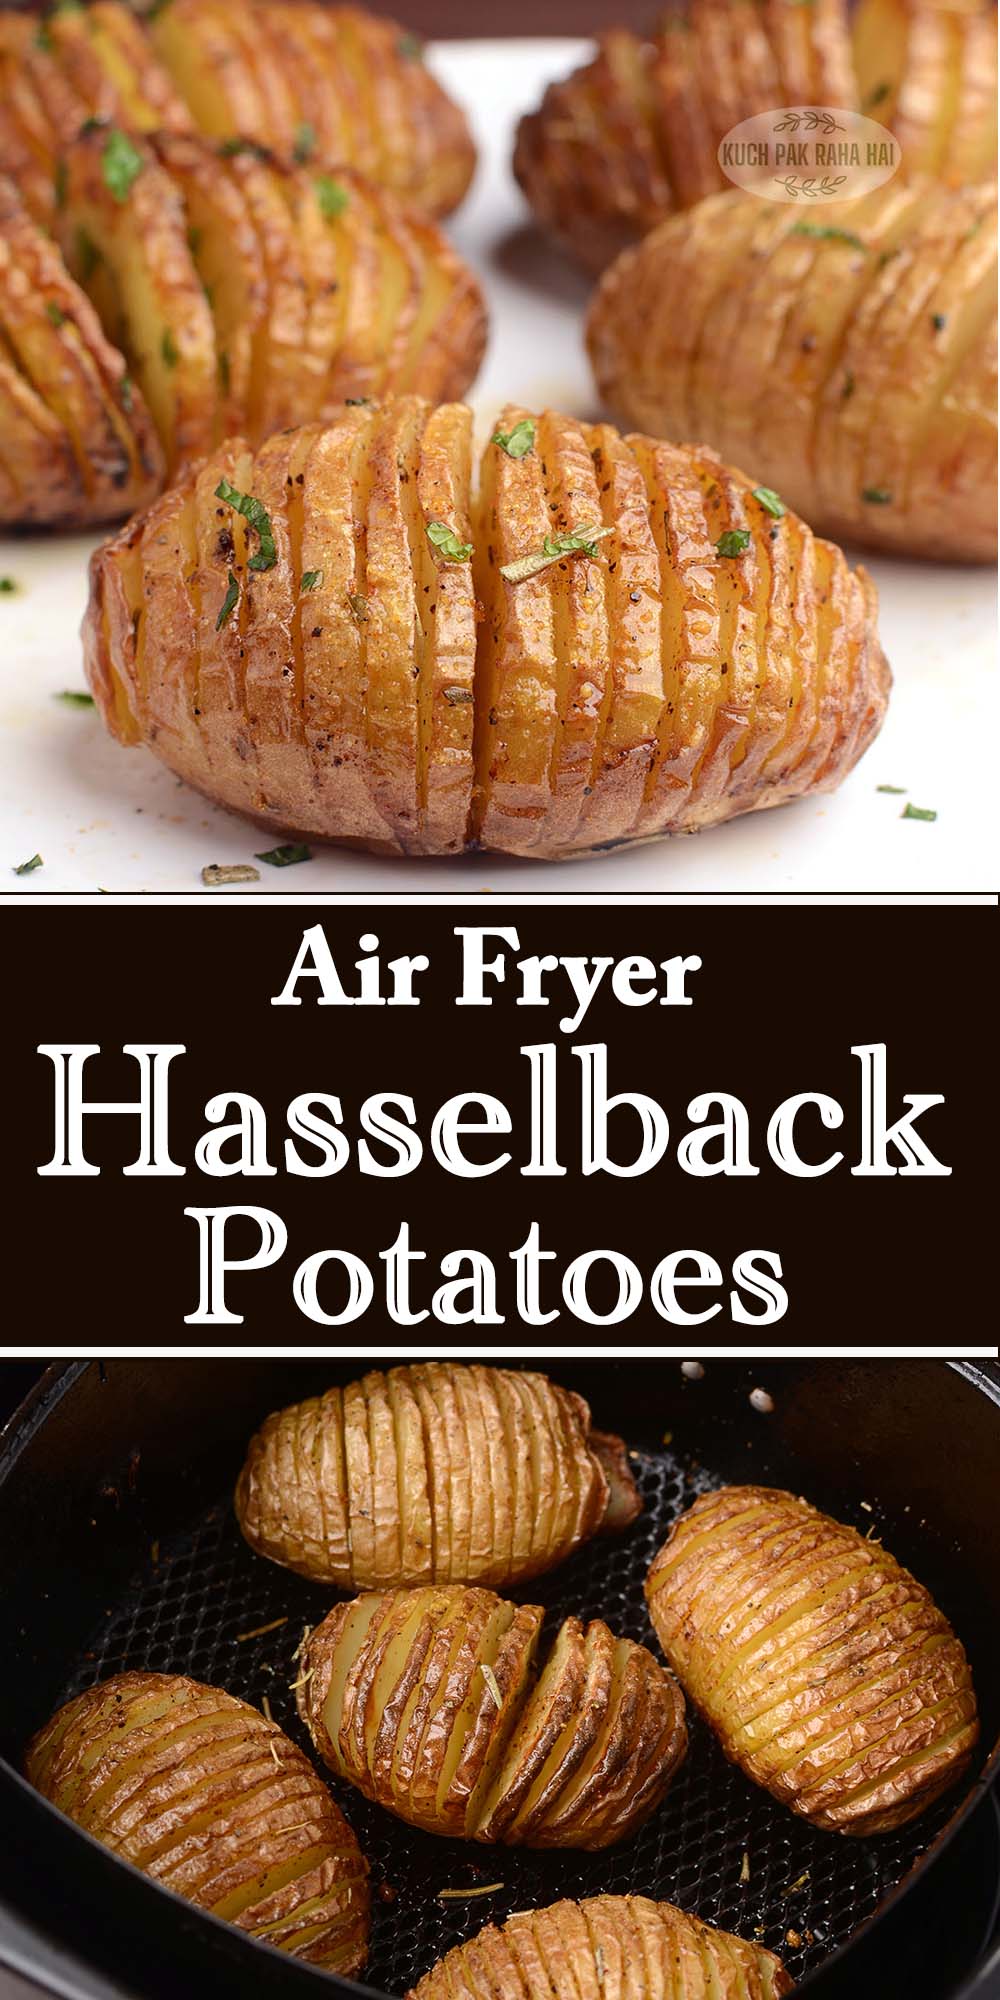 How to make hasselback potatoes in an air fryer.